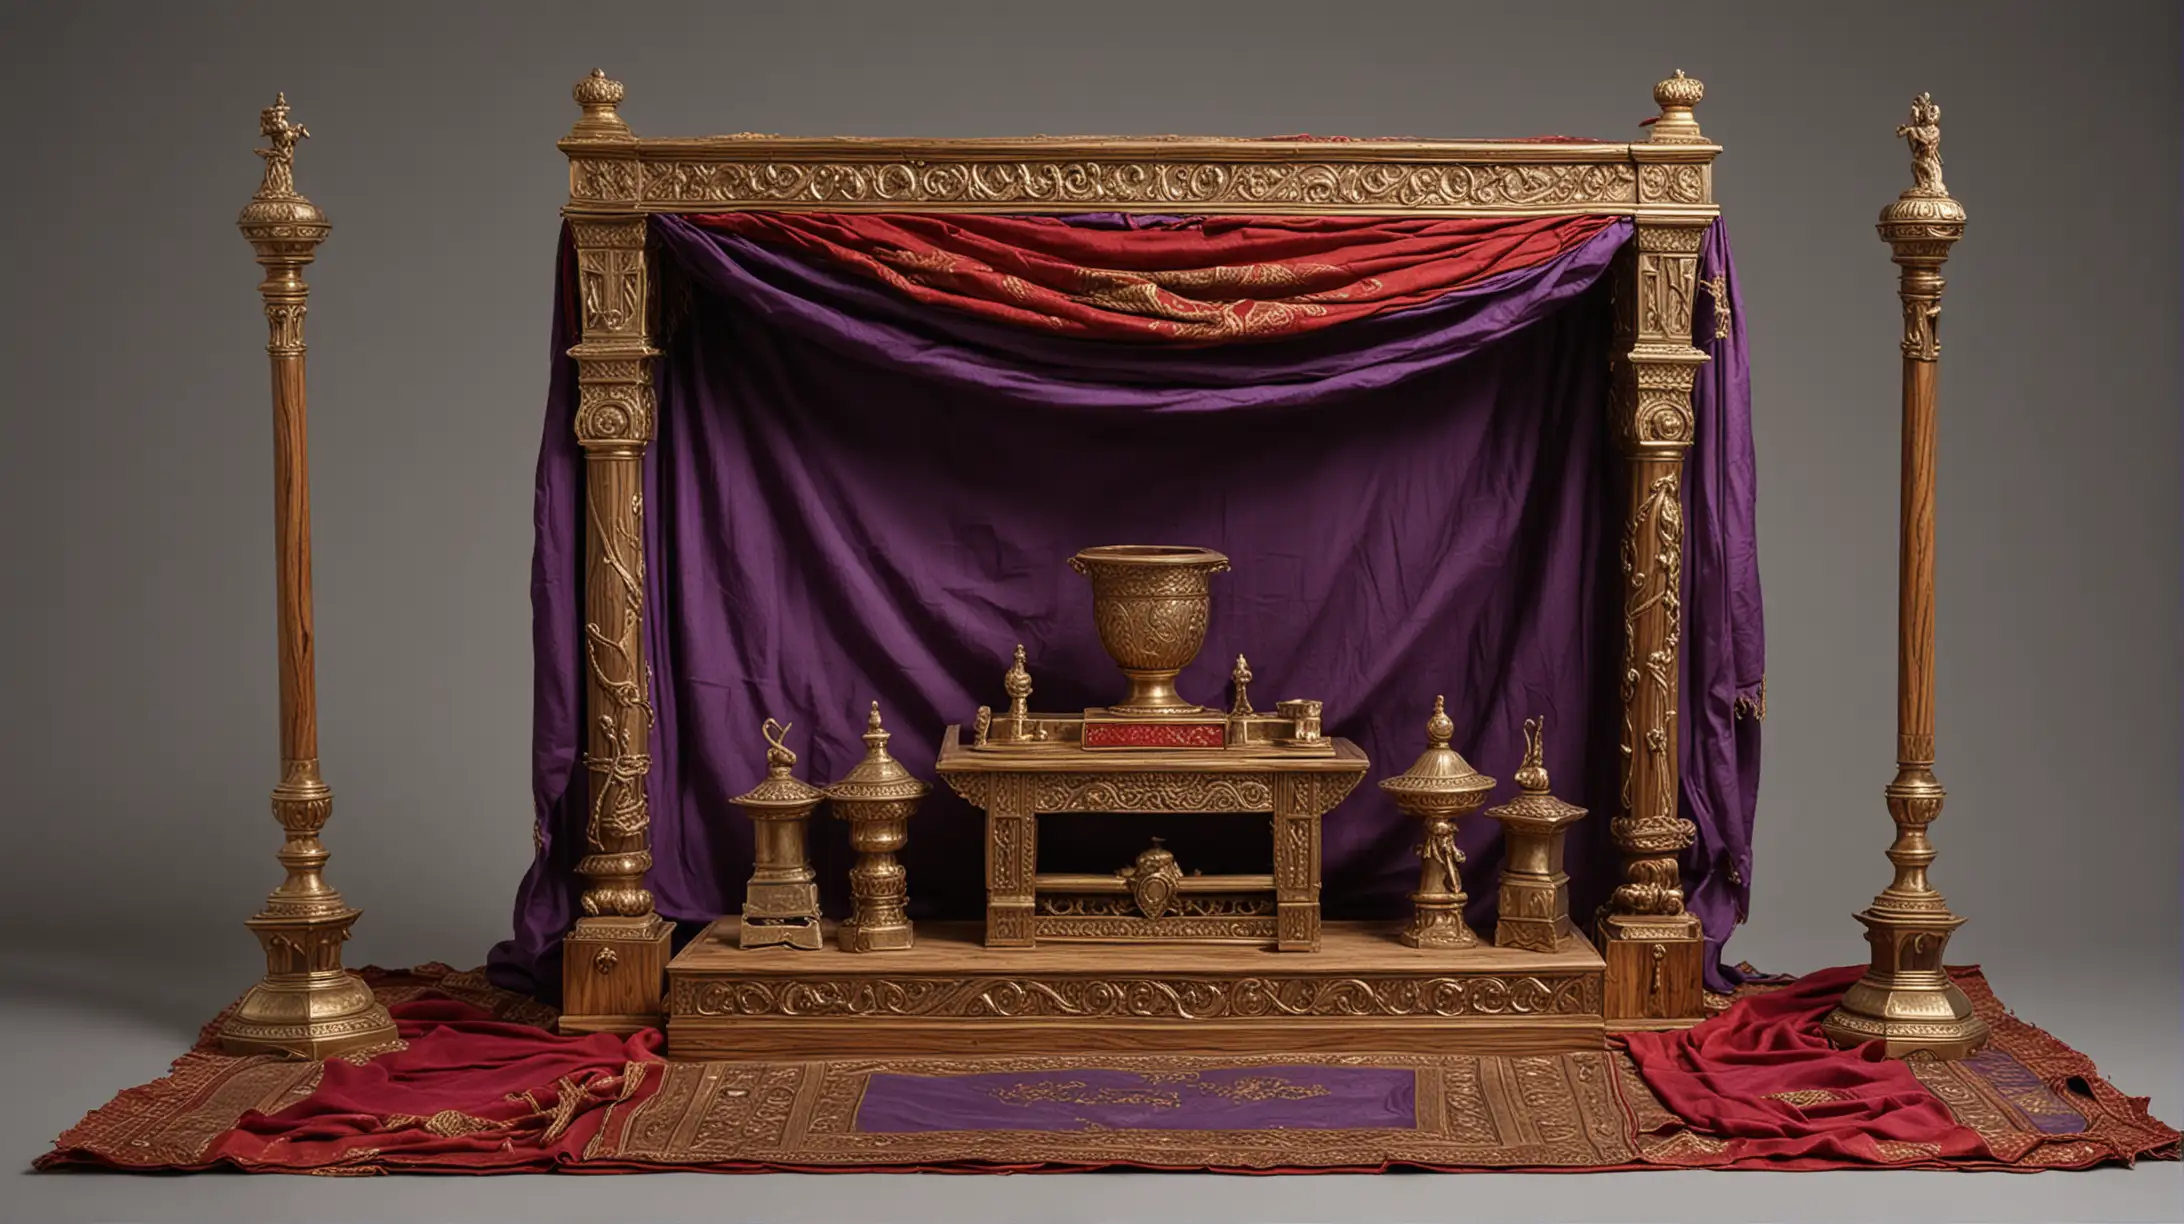 A decorative alter made of shittim wood, items of brass, gold and silver, and purple & scarlet cloth should be visible in the scene. Set during the Era of the Biblical Moses.